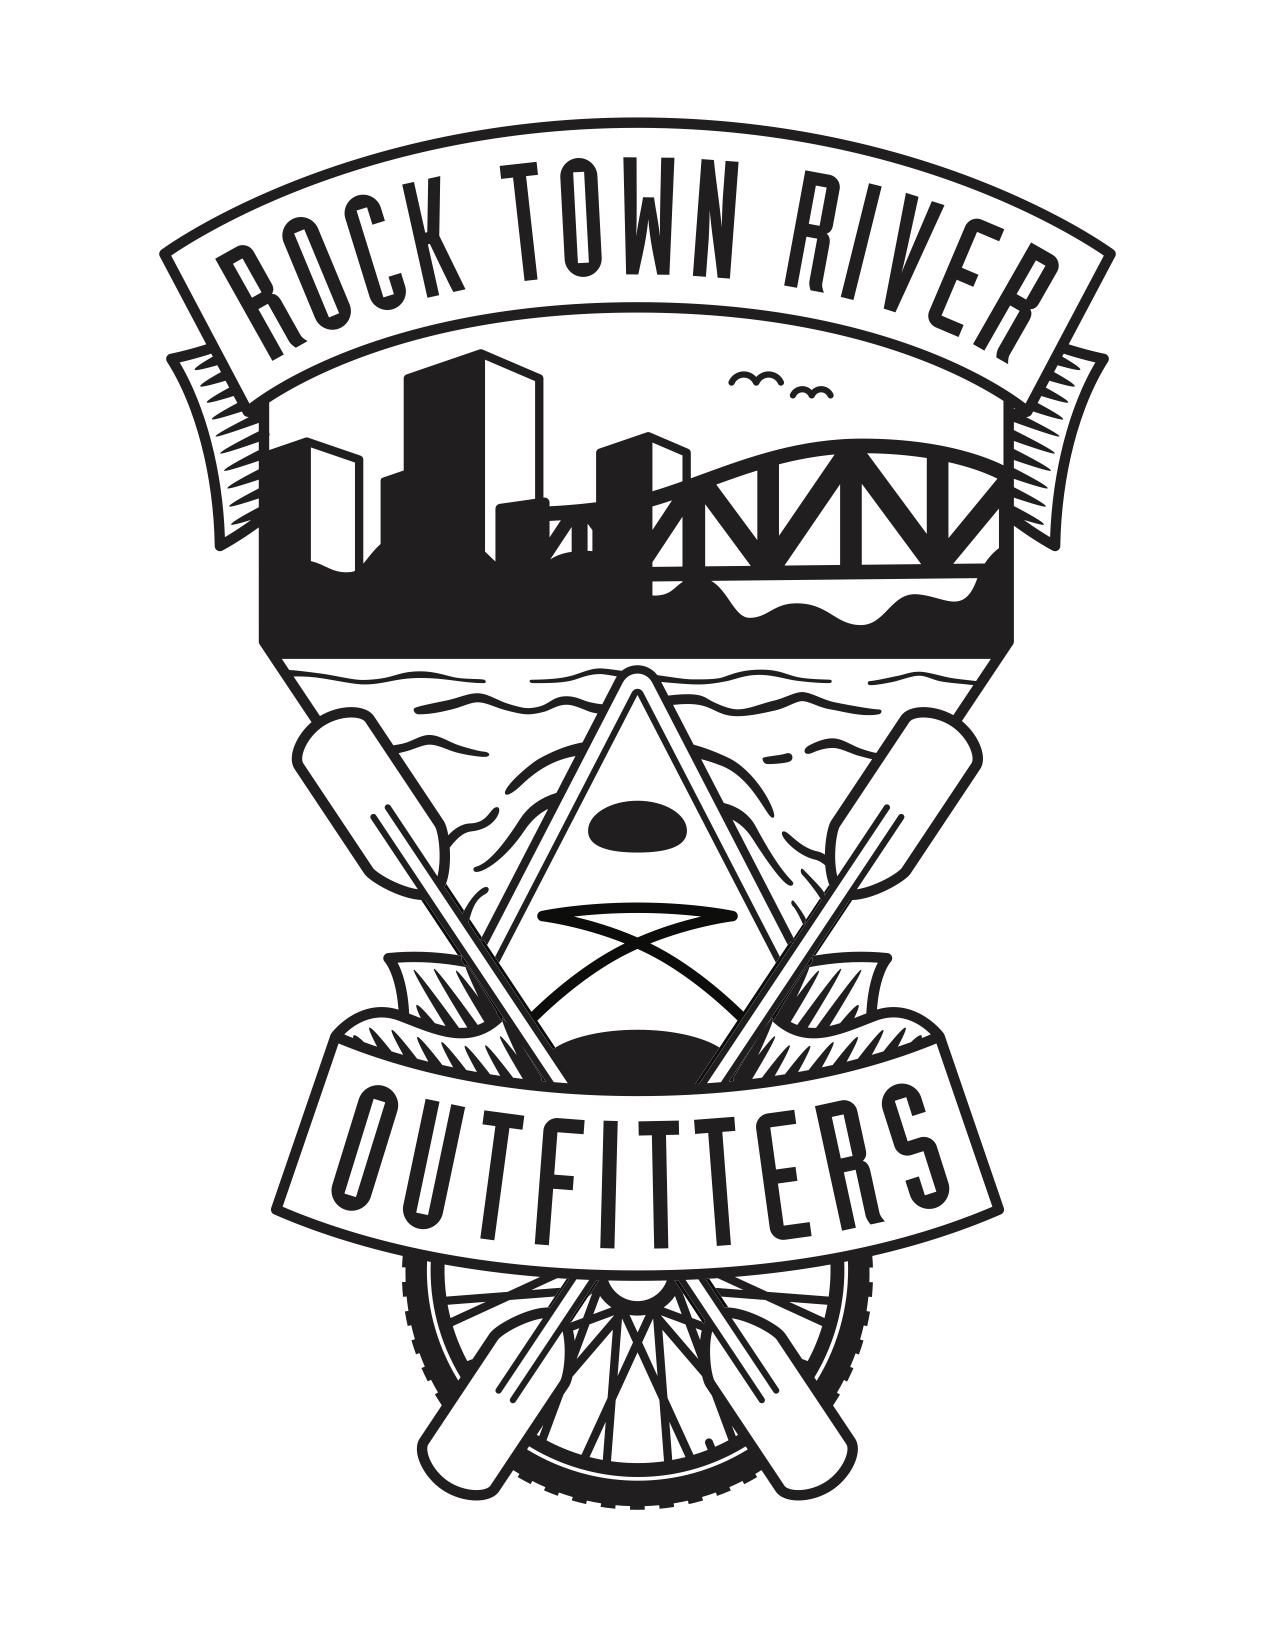 Rock Town River Outfitters